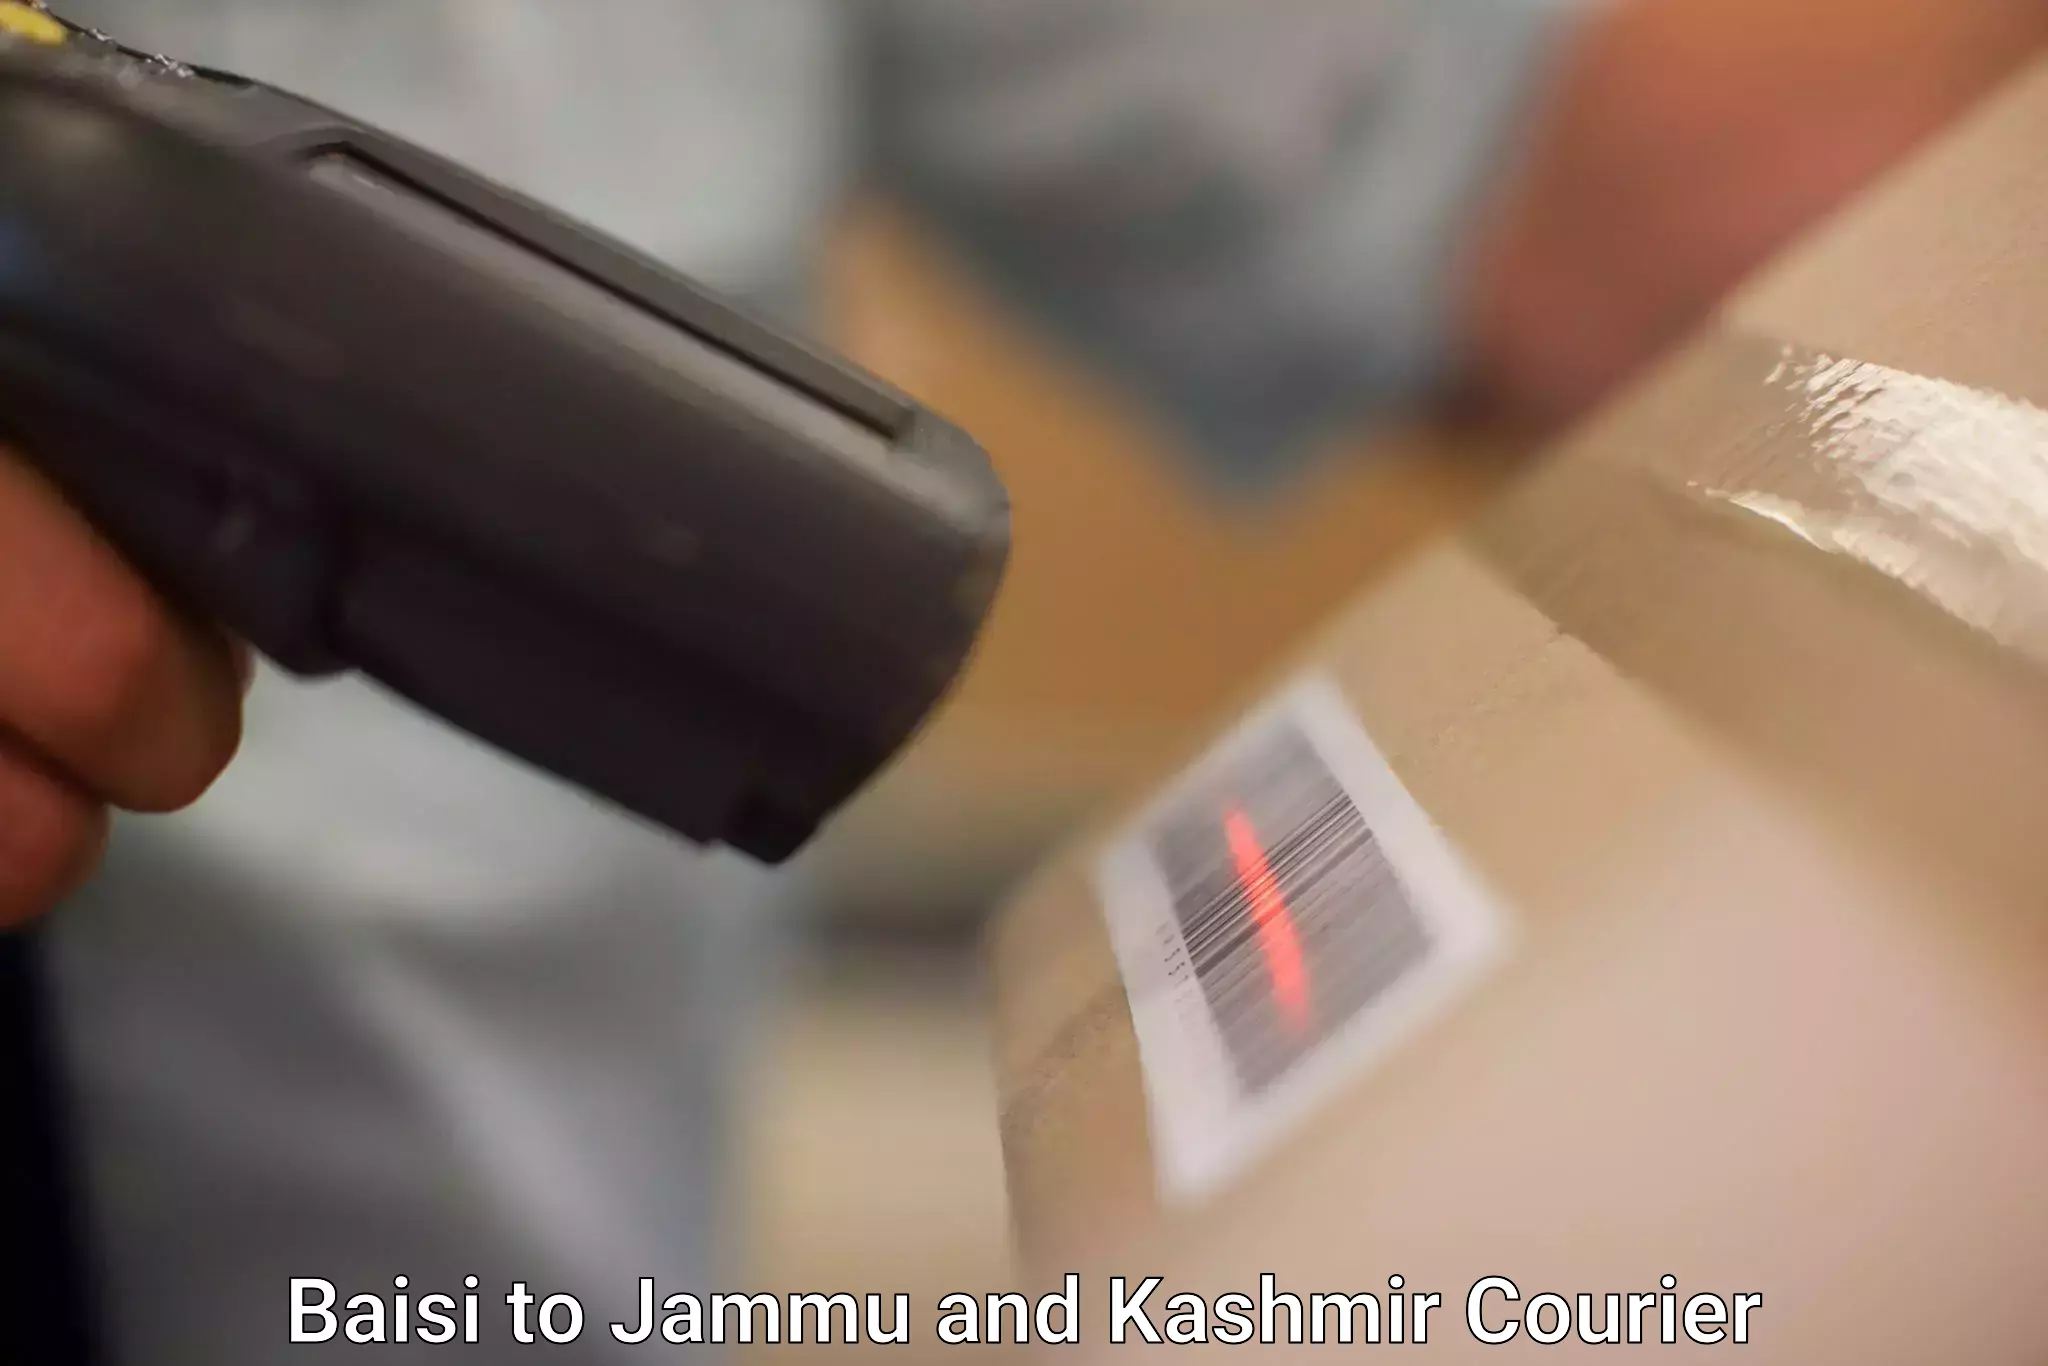 Sustainable shipping practices Baisi to Jammu and Kashmir